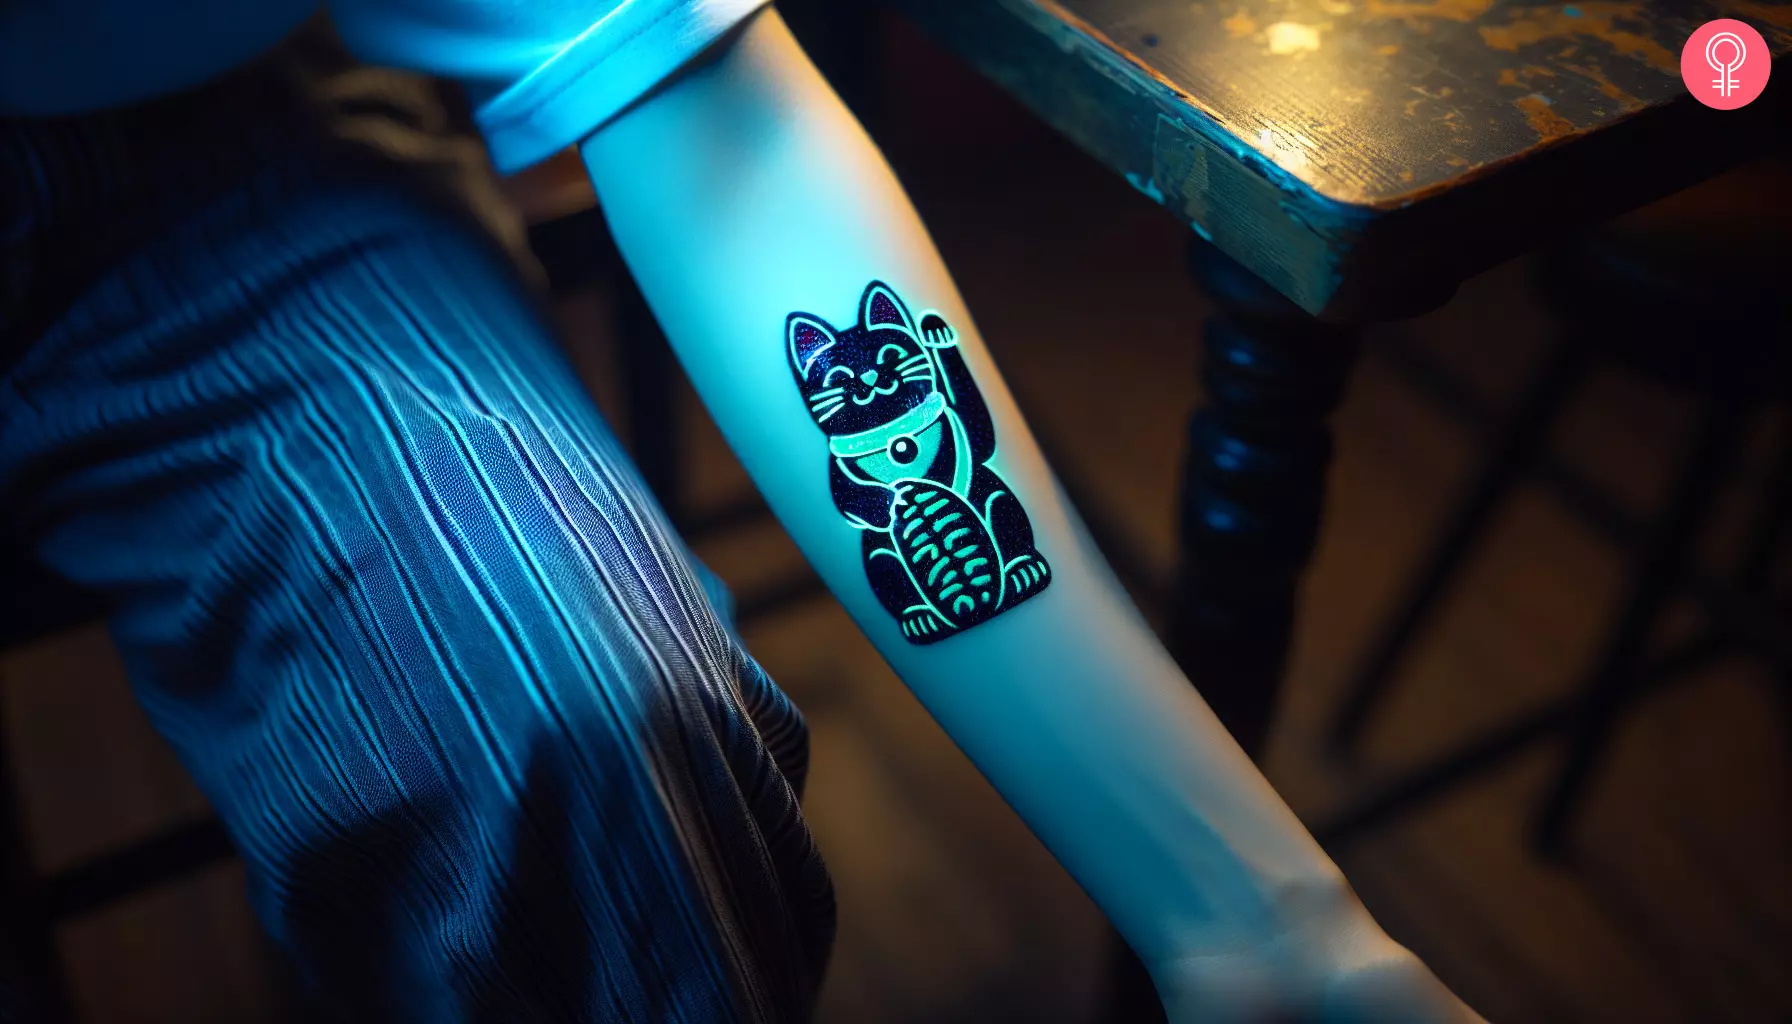  A lucky cat UV tattoo on the forearm of a woman